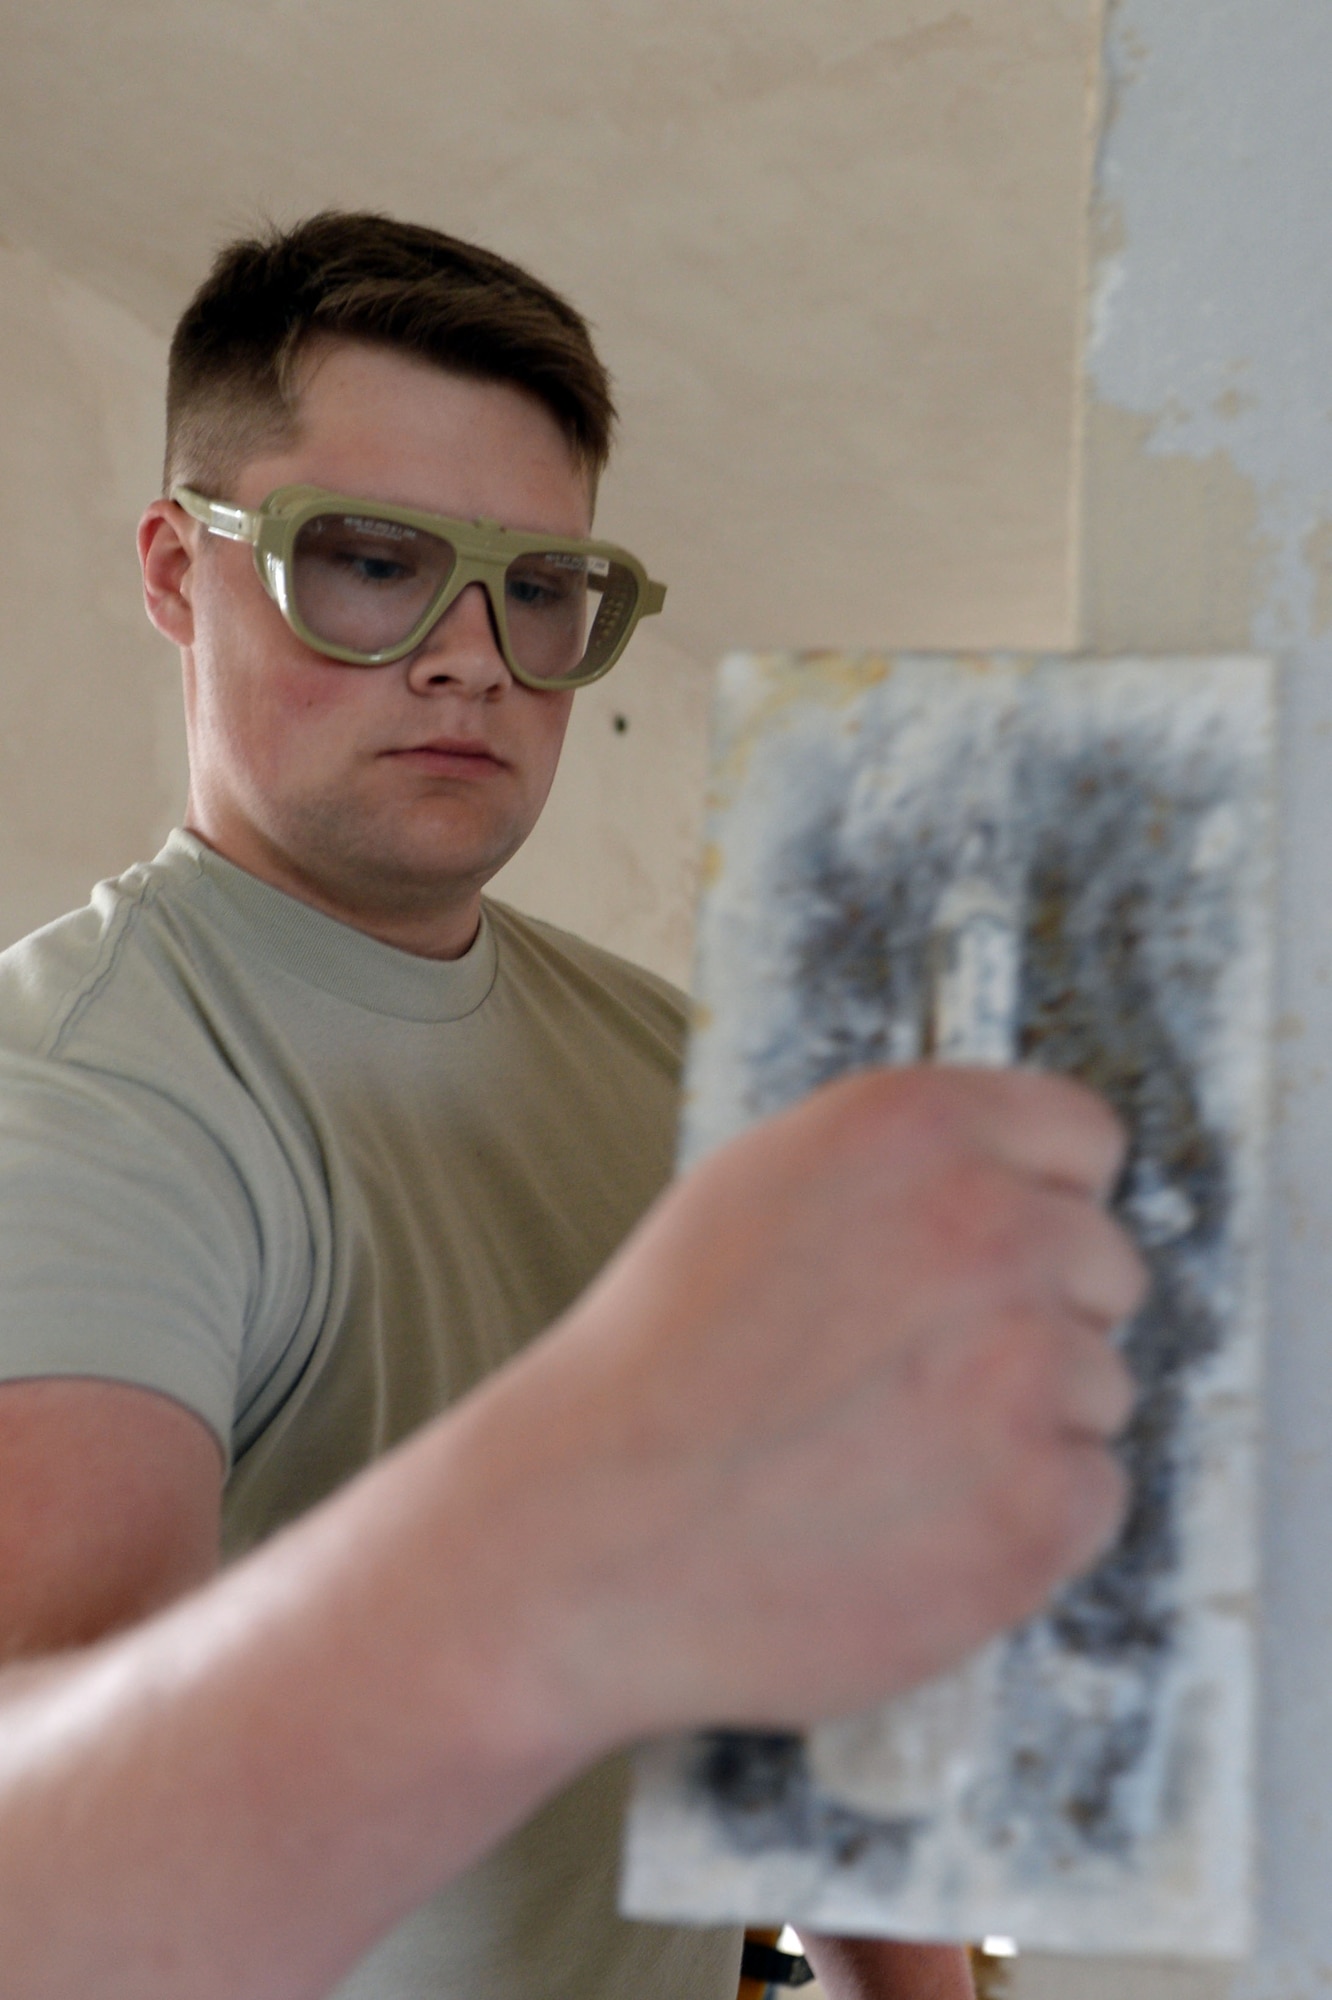 U.S. Air Force Airman 1st Class Lane Kocian, 52nd Civil Engineer Squadron structures journeyman from Luise, Texas, plasters a doorway in an unused building at Spangdahlem Air Base, Germany, June 3, 2014. Structures Airmen have been working this project for almost a month. (U.S. Air Force photo by Senior Airman Alexis Siekert/Released)